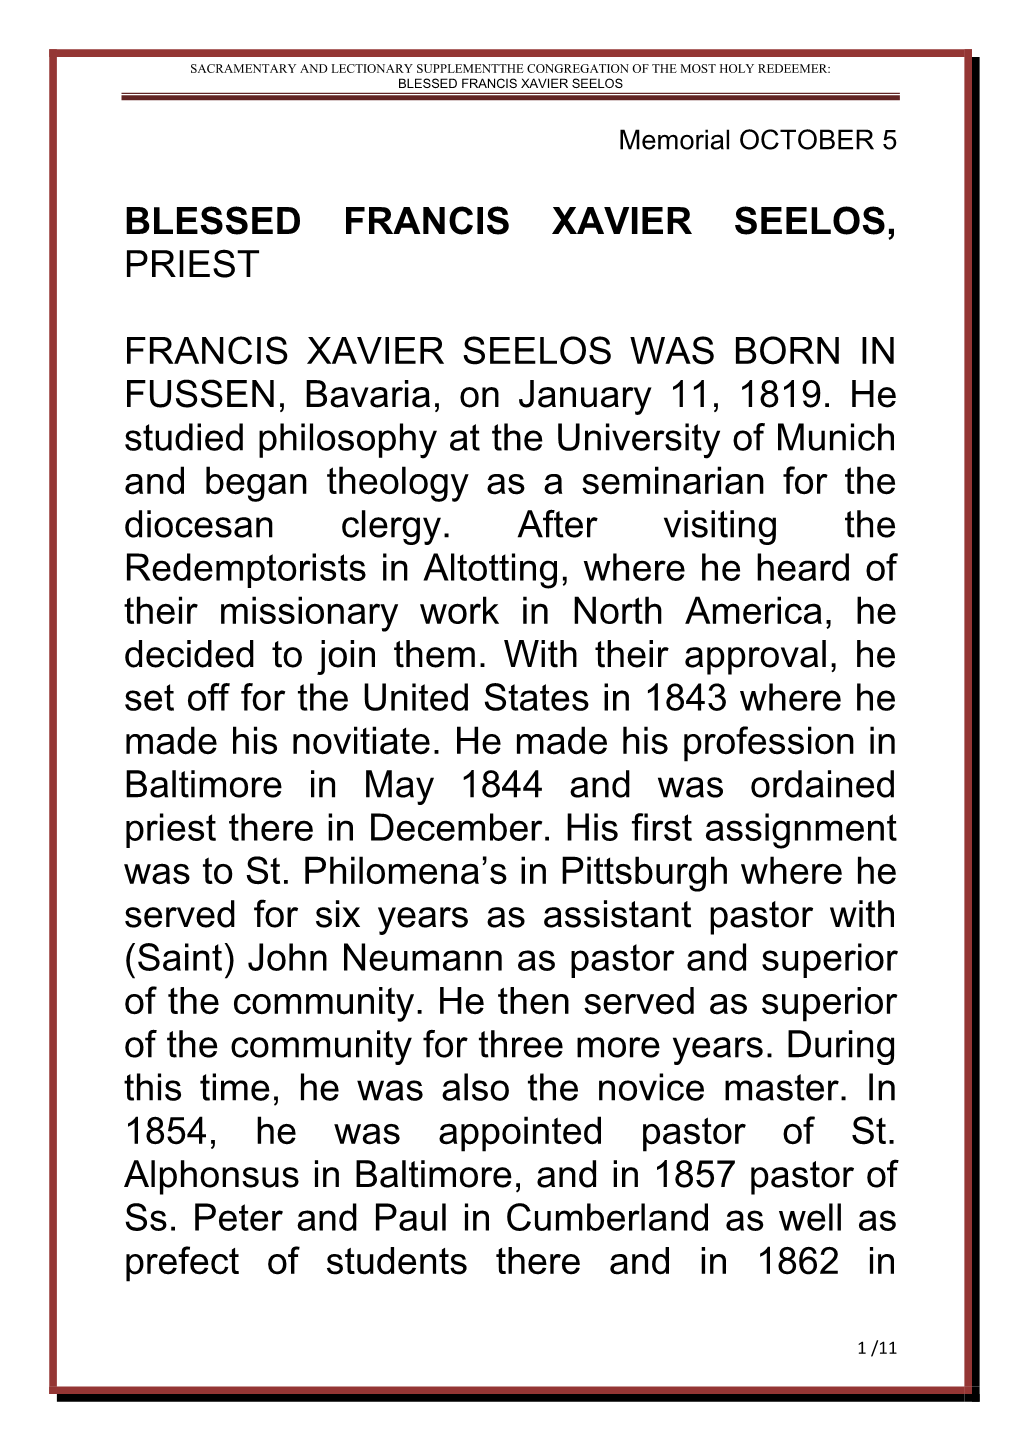 Sacramentary and Lectionary Supplementthe Congregation of the Most Holy Redeemer: Blessed Francis Xavier Seelos